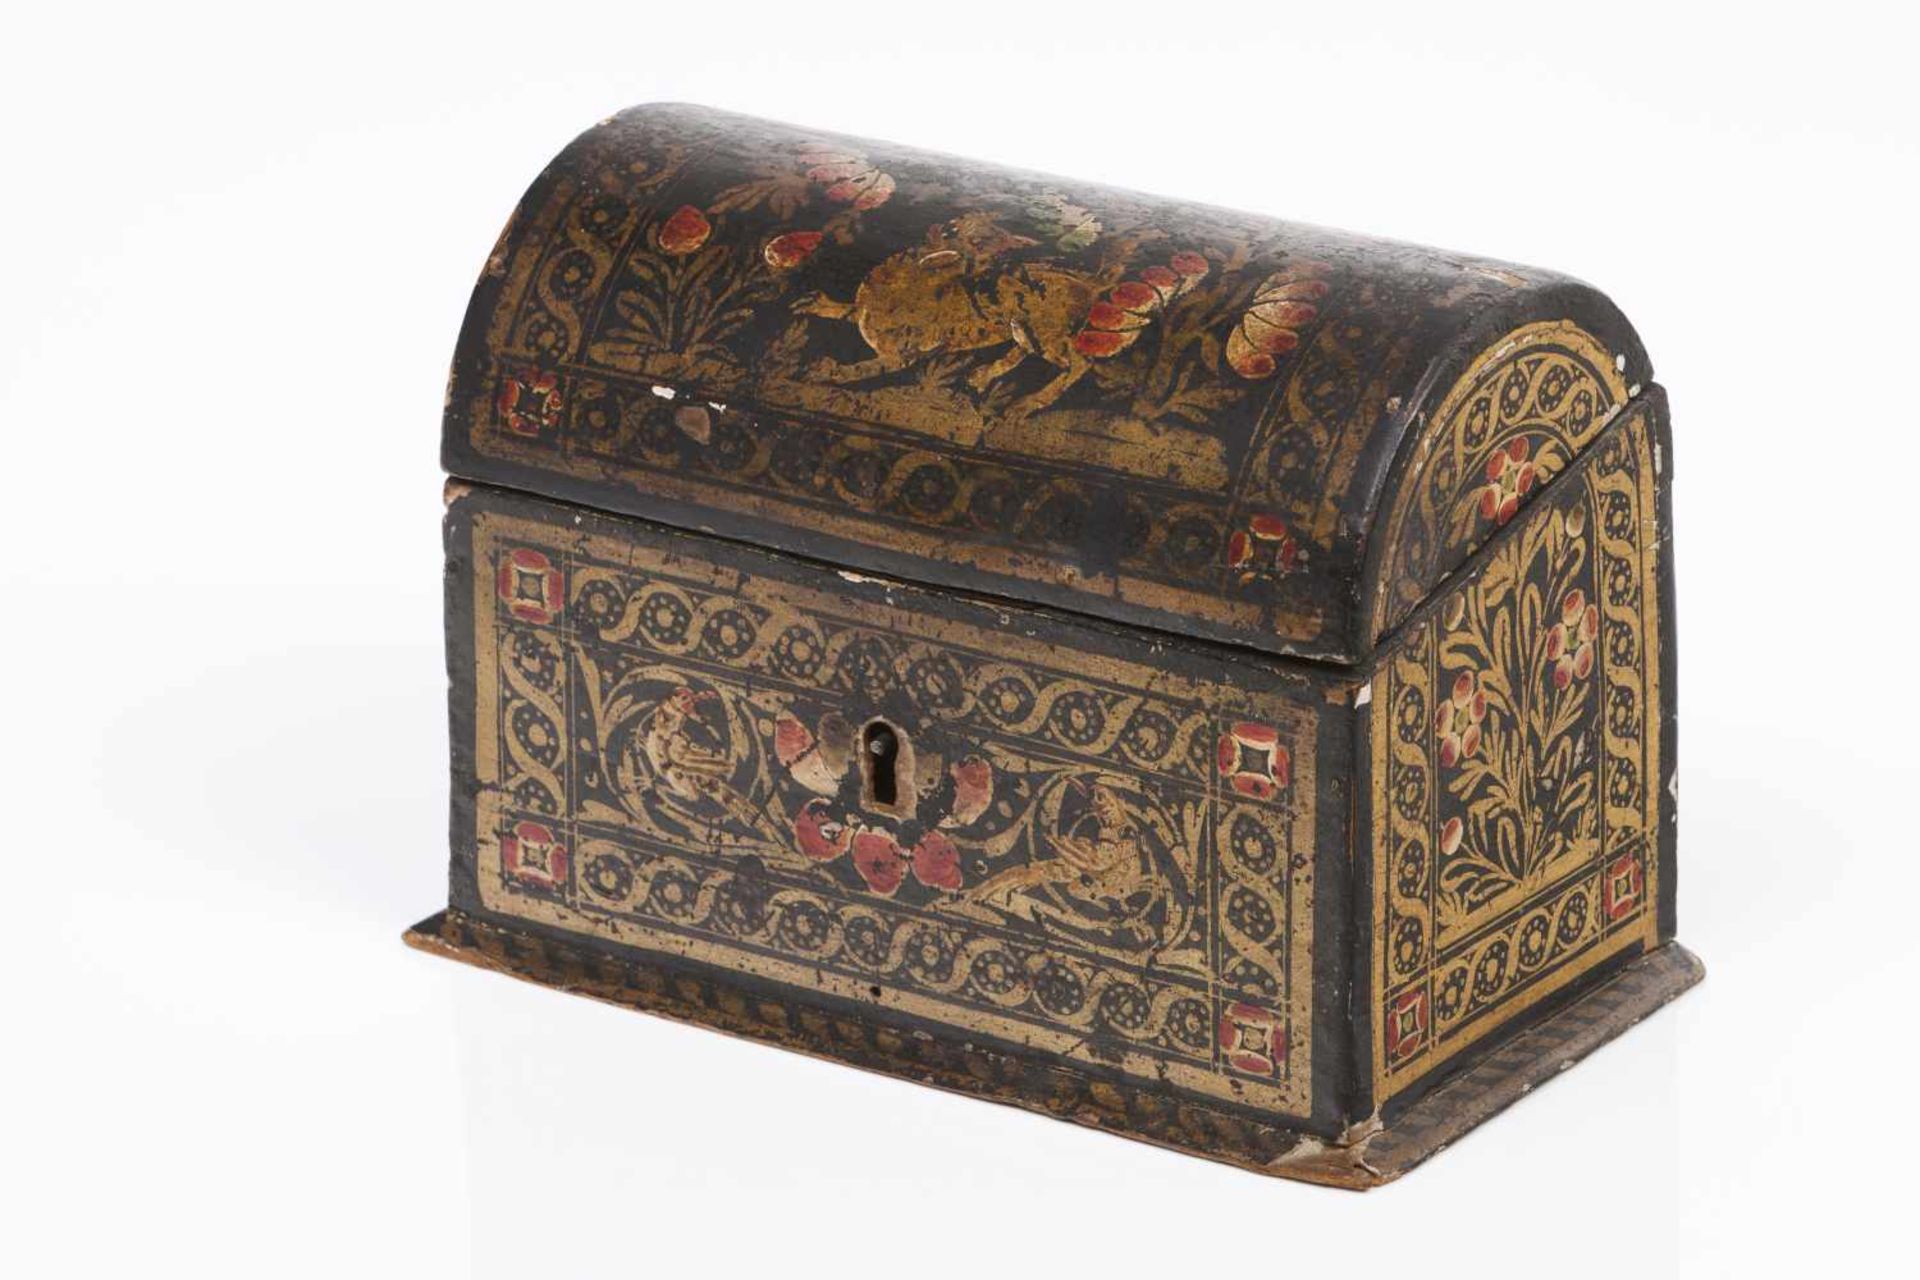 A small trunkPolychrome and gilt wood decorated with flowers and animalsItaly, 19th century(minor